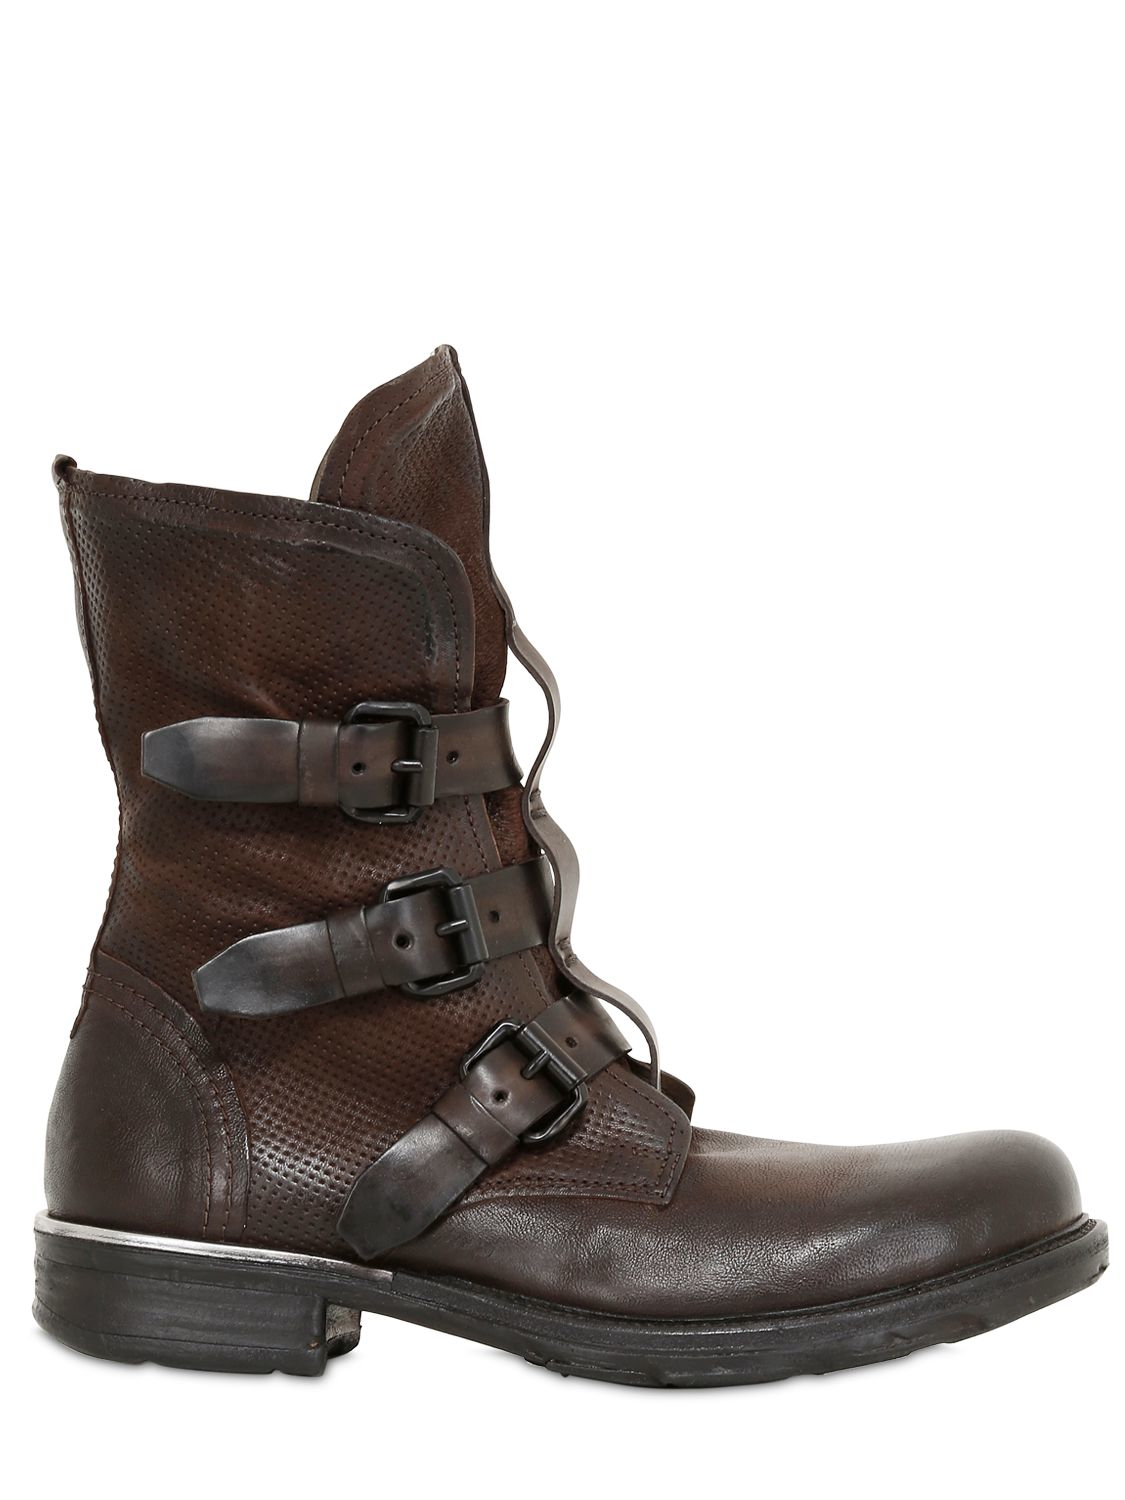 Lyst - A.S.98 3 Buckles Washed Leather Boot in Brown